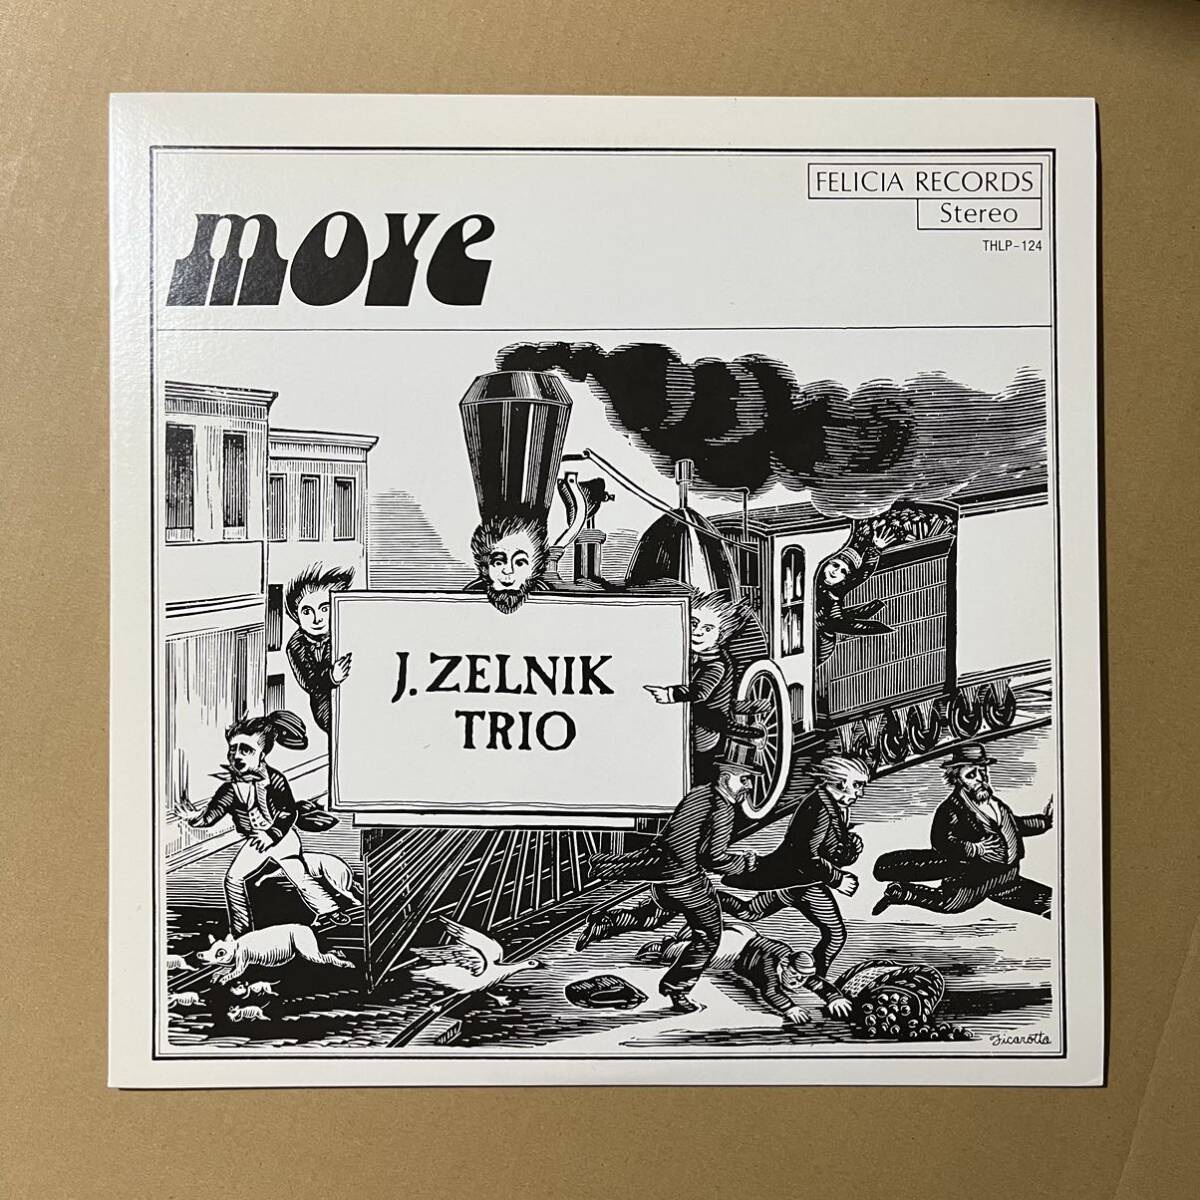  beautiful record / 180g weight record / height sound quality / J. Zelnik Trio / Move